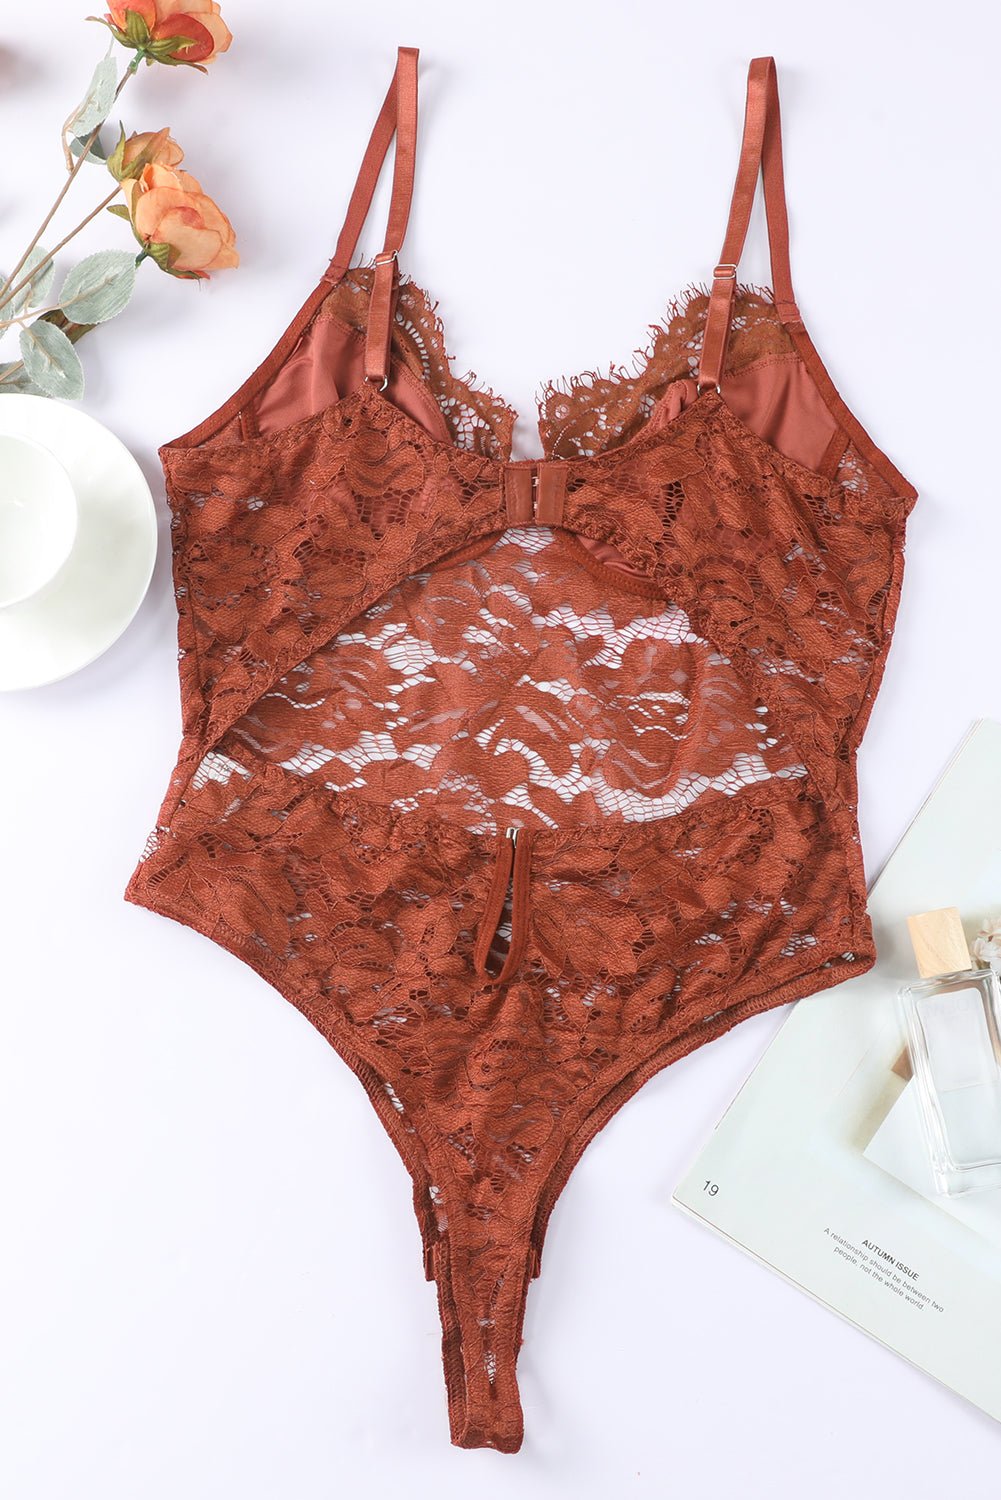 Enchantress Lace Bodysuit - Embrace Your Inner Goddess and Captivate Hearts with Divine Elegance and Comfort. - Guy Christopher